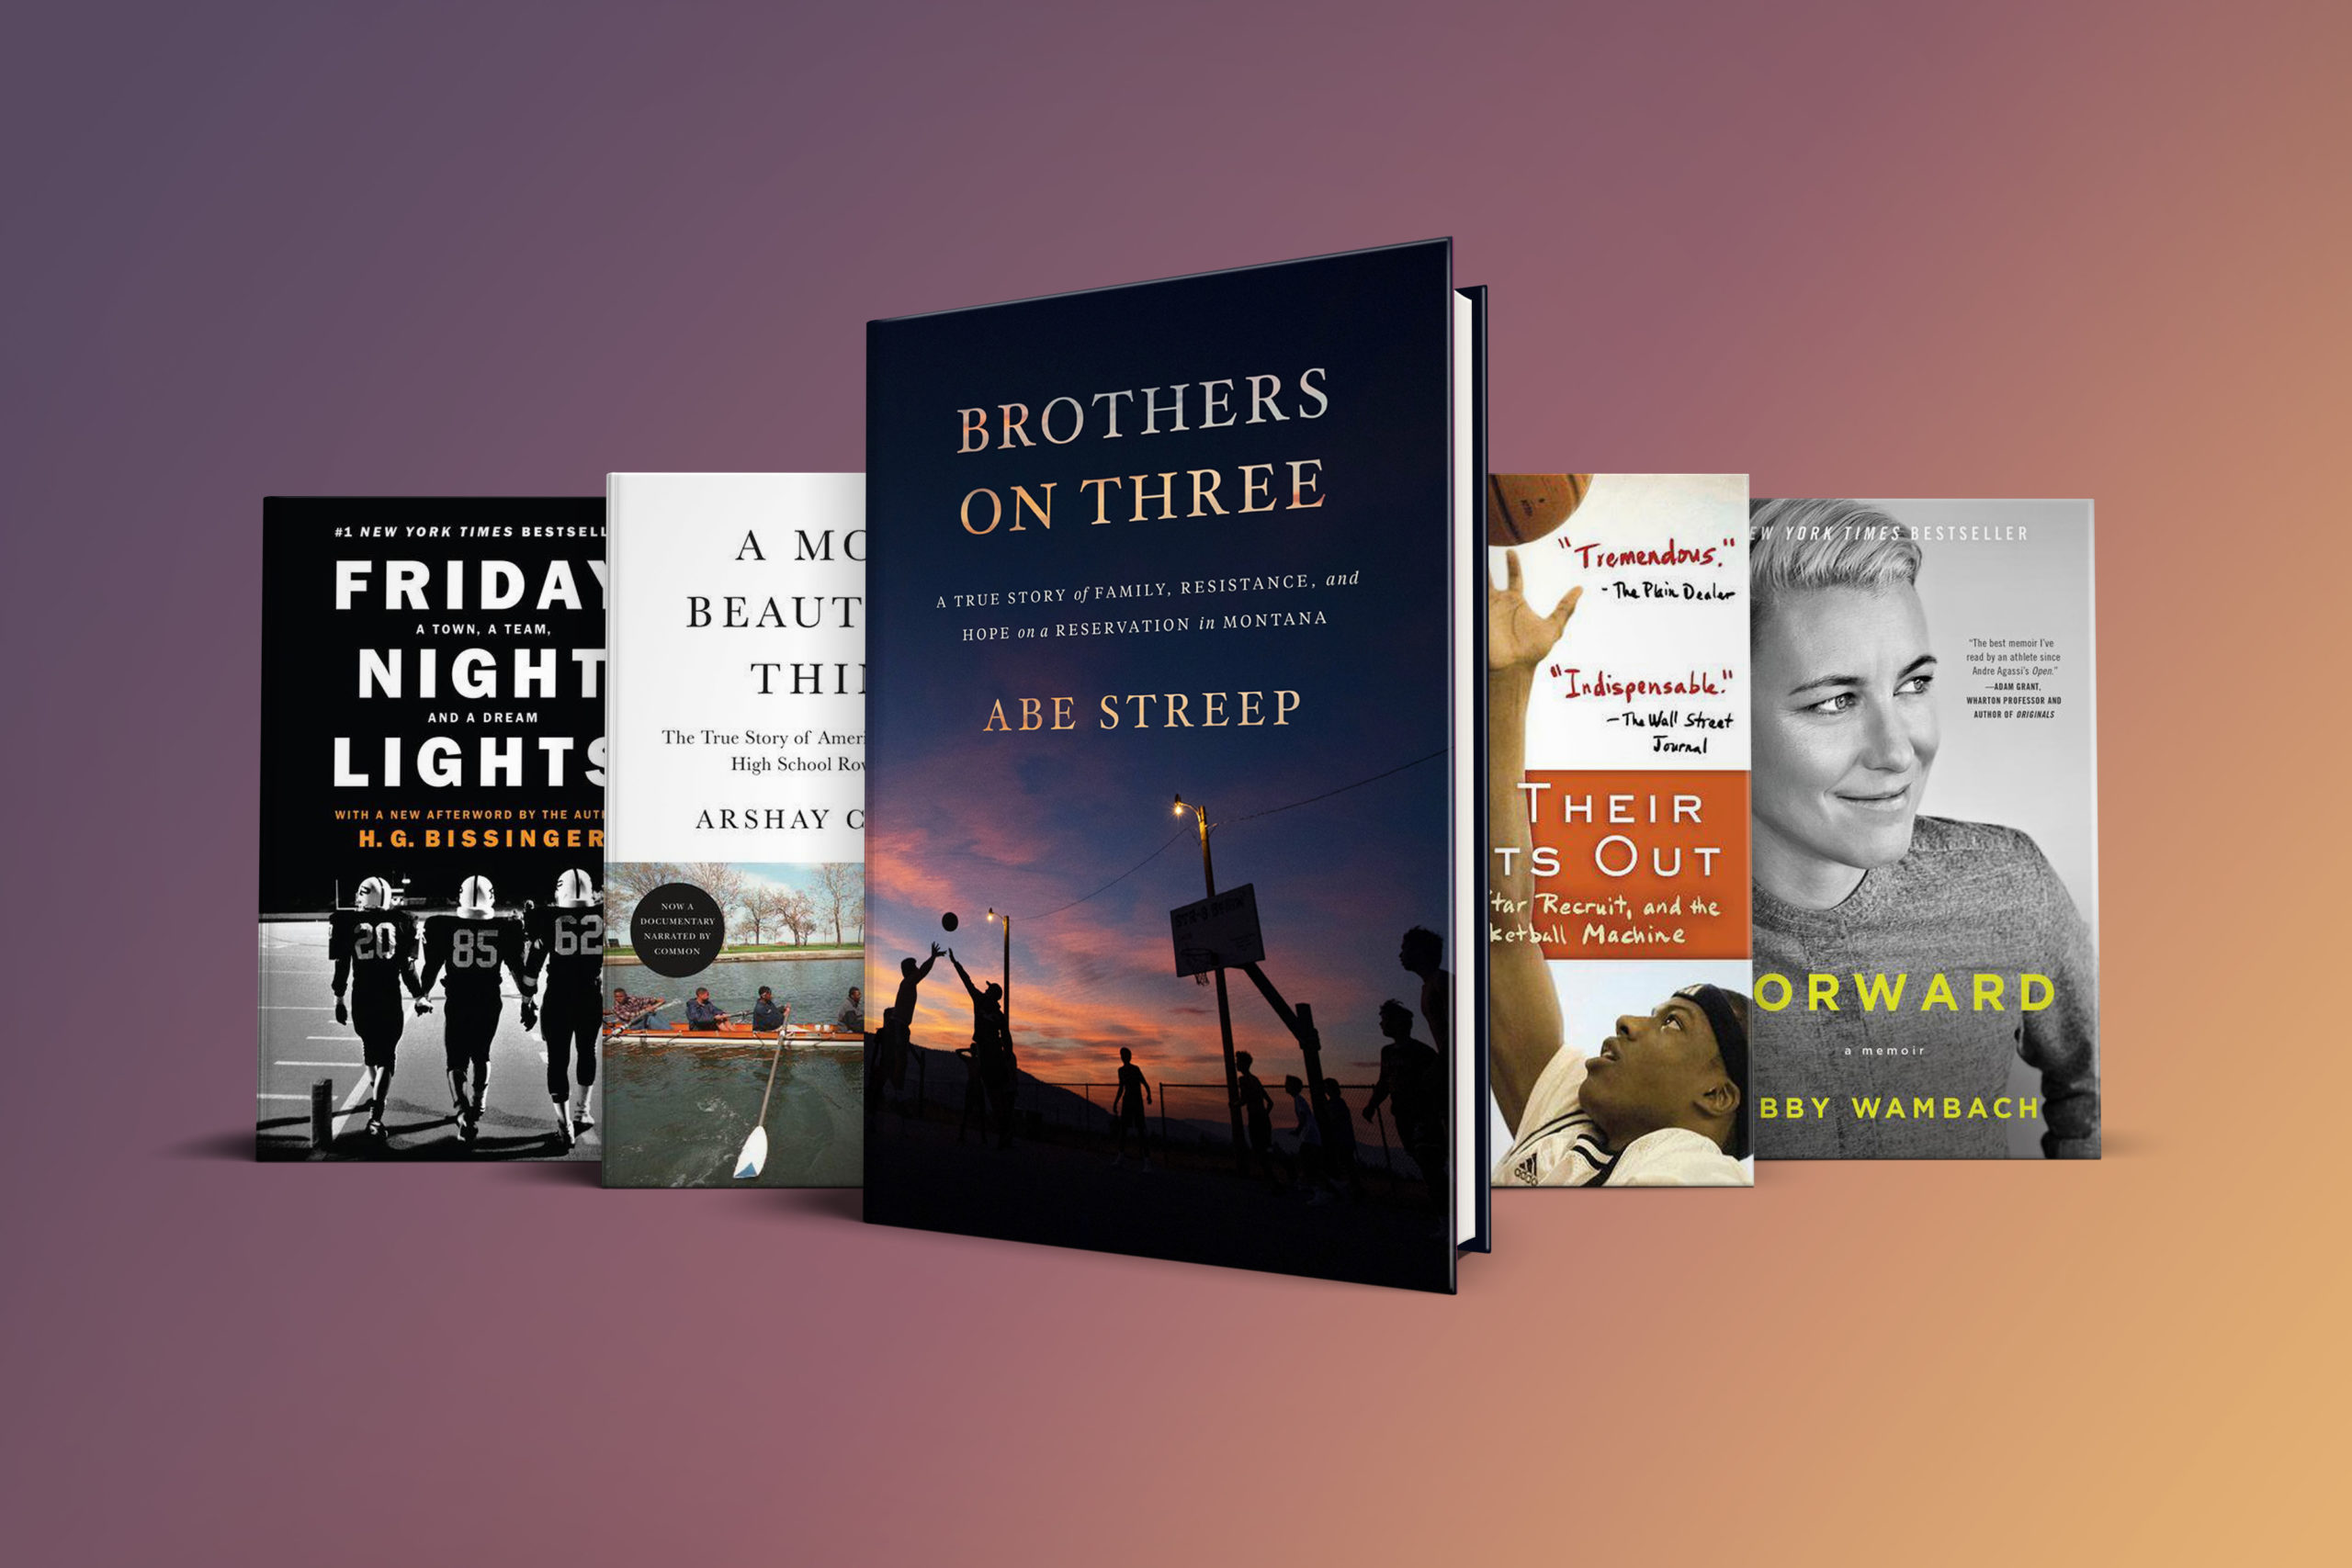 A collection of books with diverse themes displayed against a gradient background, featuring biographies, sports stories, and personal journeys.